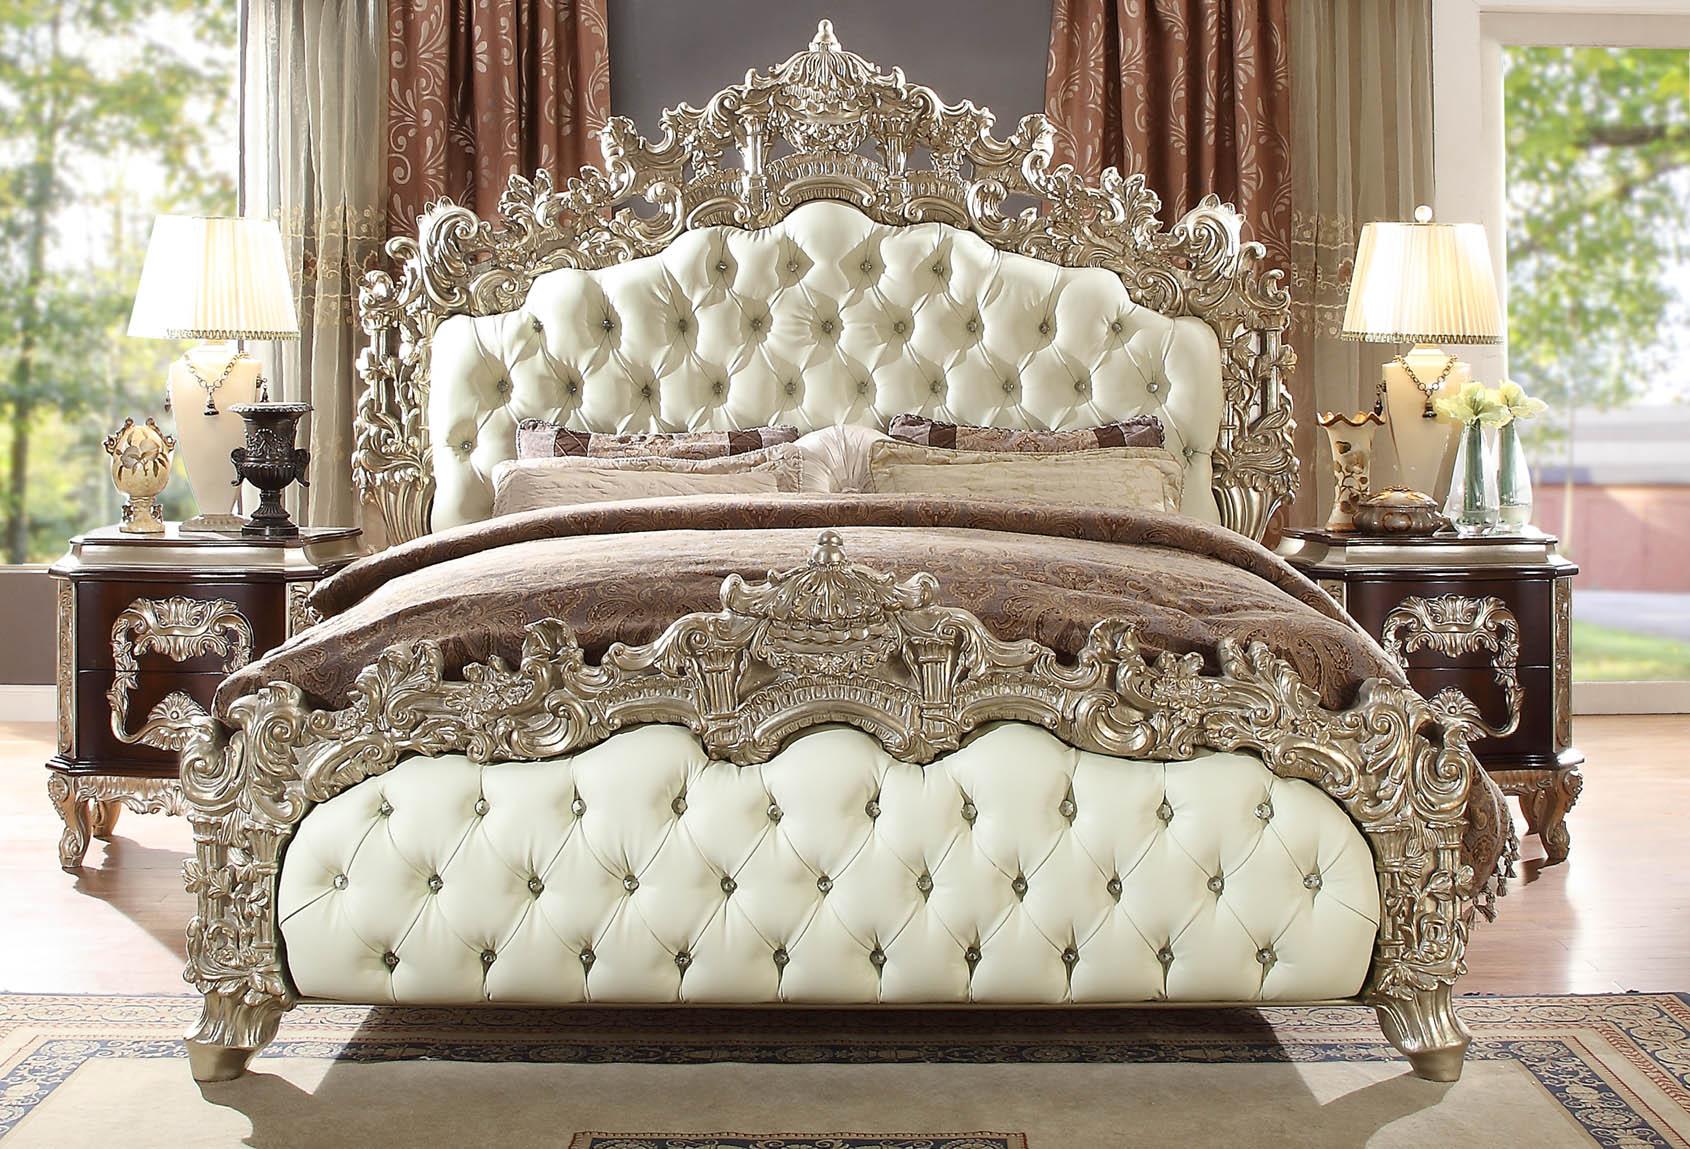 Traditional Panel Bedroom Set HD-8017 – CK BED SET HD-8017 – CK BED-3PC in Antique Silver, Antique White, Cherry Leather